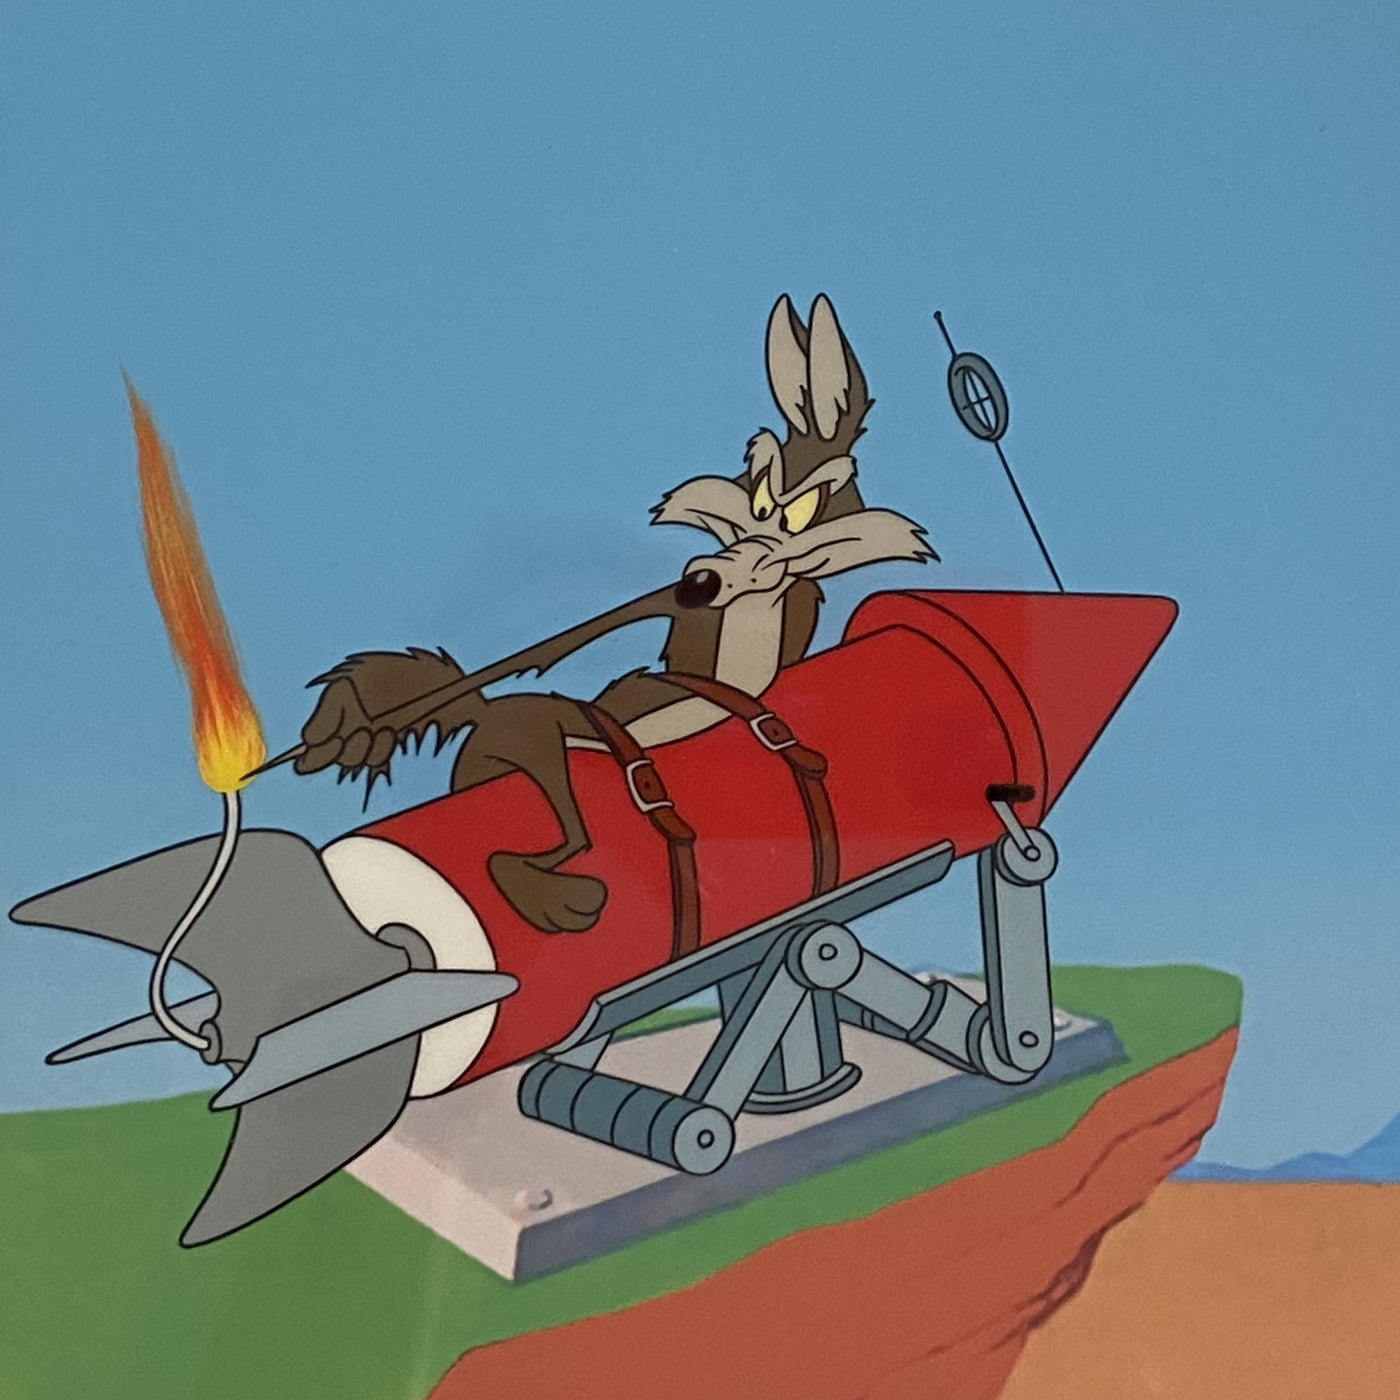 Clampett Studio Collections / Warner Bros Chosen Moments Collection Cel and Matching Drawing "Light 'Em if You Got 'Em"  featuring Wile E. Coyote